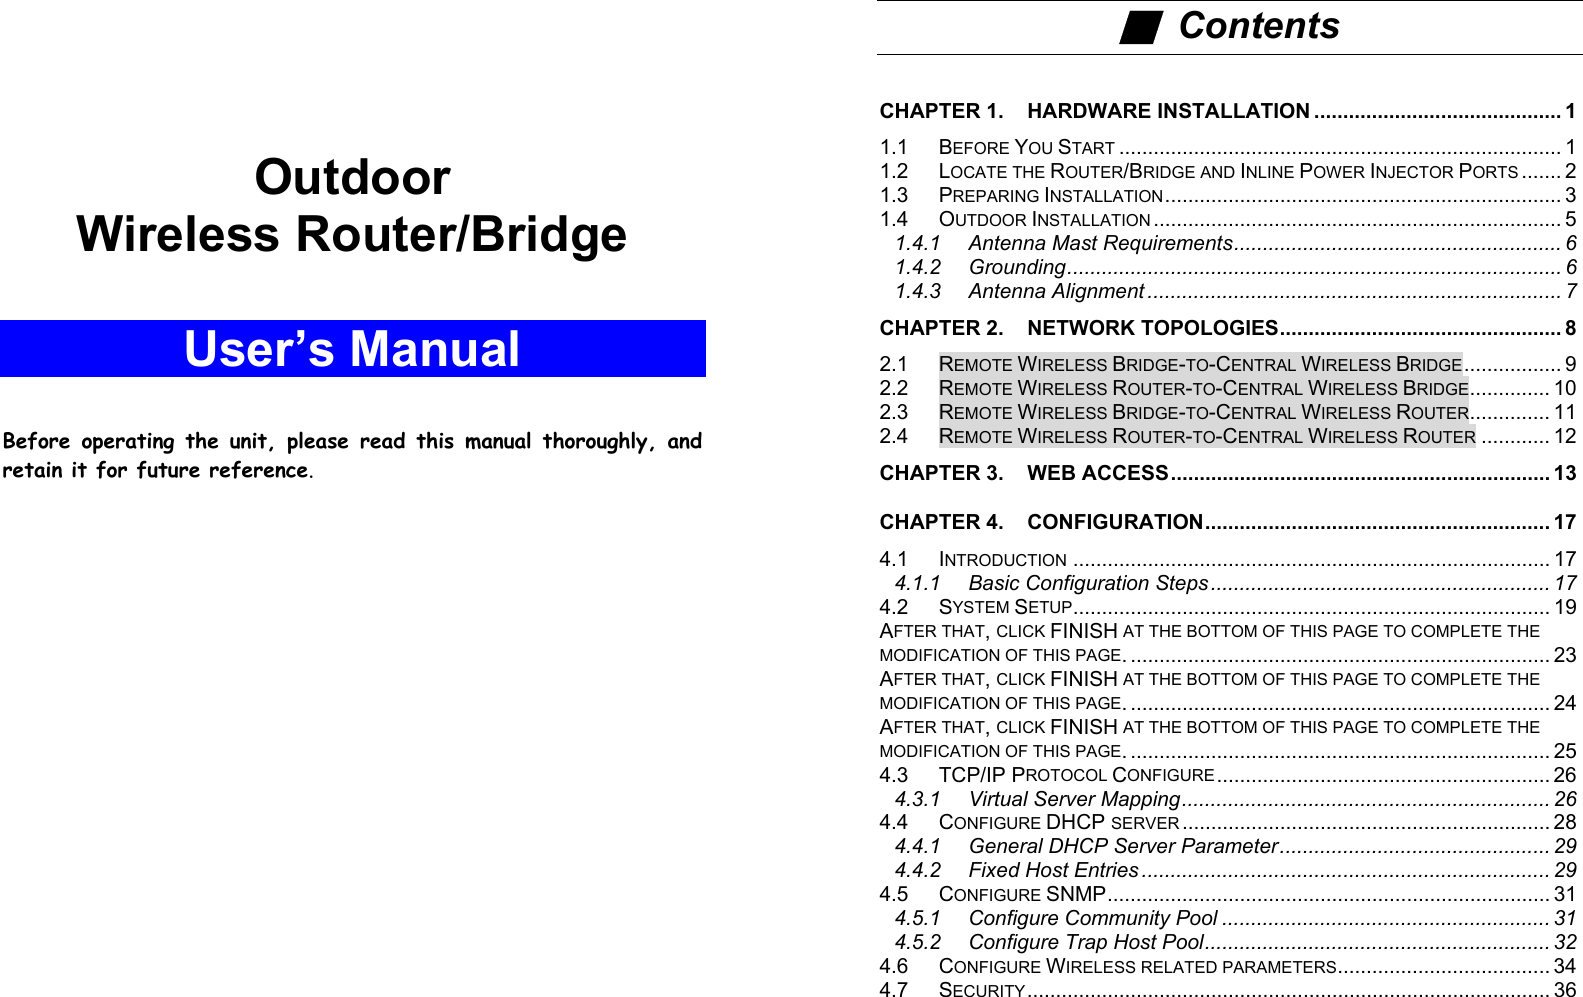 A    Outdoor Wireless Router/Bridge  User’s Manual   Before operating the unit, please read this manual thoroughly, and retain it for future reference.                i ■  Contents  CHAPTER 1. HARDWARE INSTALLATION ........................................... 1 1.1 BEFORE YOU START ............................................................................. 1 1.2 LOCATE THE ROUTER/BRIDGE AND INLINE POWER INJECTOR PORTS ....... 2 1.3 PREPARING INSTALLATION..................................................................... 3 1.4 OUTDOOR INSTALLATION ....................................................................... 5 1.4.1 Antenna Mast Requirements......................................................... 6 1.4.2 Grounding...................................................................................... 6 1.4.3 Antenna Alignment ........................................................................ 7 CHAPTER 2. NETWORK TOPOLOGIES................................................. 8 2.1 REMOTE WIRELESS BRIDGE-TO-CENTRAL WIRELESS BRIDGE................. 9 2.2 REMOTE WIRELESS ROUTER-TO-CENTRAL WIRELESS BRIDGE.............. 10 2.3 REMOTE WIRELESS BRIDGE-TO-CENTRAL WIRELESS ROUTER.............. 11 2.4 REMOTE WIRELESS ROUTER-TO-CENTRAL WIRELESS ROUTER ............ 12 CHAPTER 3. WEB ACCESS.................................................................. 13 CHAPTER 4. CONFIGURATION............................................................ 17 4.1 INTRODUCTION ................................................................................... 17 4.1.1 Basic Configuration Steps ........................................................... 17 4.2 SYSTEM SETUP................................................................................... 19 AFTER THAT, CLICK FINISH AT THE BOTTOM OF THIS PAGE TO COMPLETE THE MODIFICATION OF THIS PAGE. ......................................................................... 23 AFTER THAT, CLICK FINISH AT THE BOTTOM OF THIS PAGE TO COMPLETE THE MODIFICATION OF THIS PAGE. ......................................................................... 24 AFTER THAT, CLICK FINISH AT THE BOTTOM OF THIS PAGE TO COMPLETE THE MODIFICATION OF THIS PAGE. ......................................................................... 25 4.3 TCP/IP PROTOCOL CONFIGURE.......................................................... 26 4.3.1 Virtual Server Mapping................................................................ 26 4.4 CONFIGURE DHCP SERVER ................................................................ 28 4.4.1 General DHCP Server Parameter............................................... 29 4.4.2 Fixed Host Entries ....................................................................... 29 4.5 CONFIGURE SNMP............................................................................. 31 4.5.1 Configure Community Pool ......................................................... 31 4.5.2 Configure Trap Host Pool............................................................ 32 4.6 CONFIGURE WIRELESS RELATED PARAMETERS..................................... 34 4.7 SECURITY........................................................................................... 36 